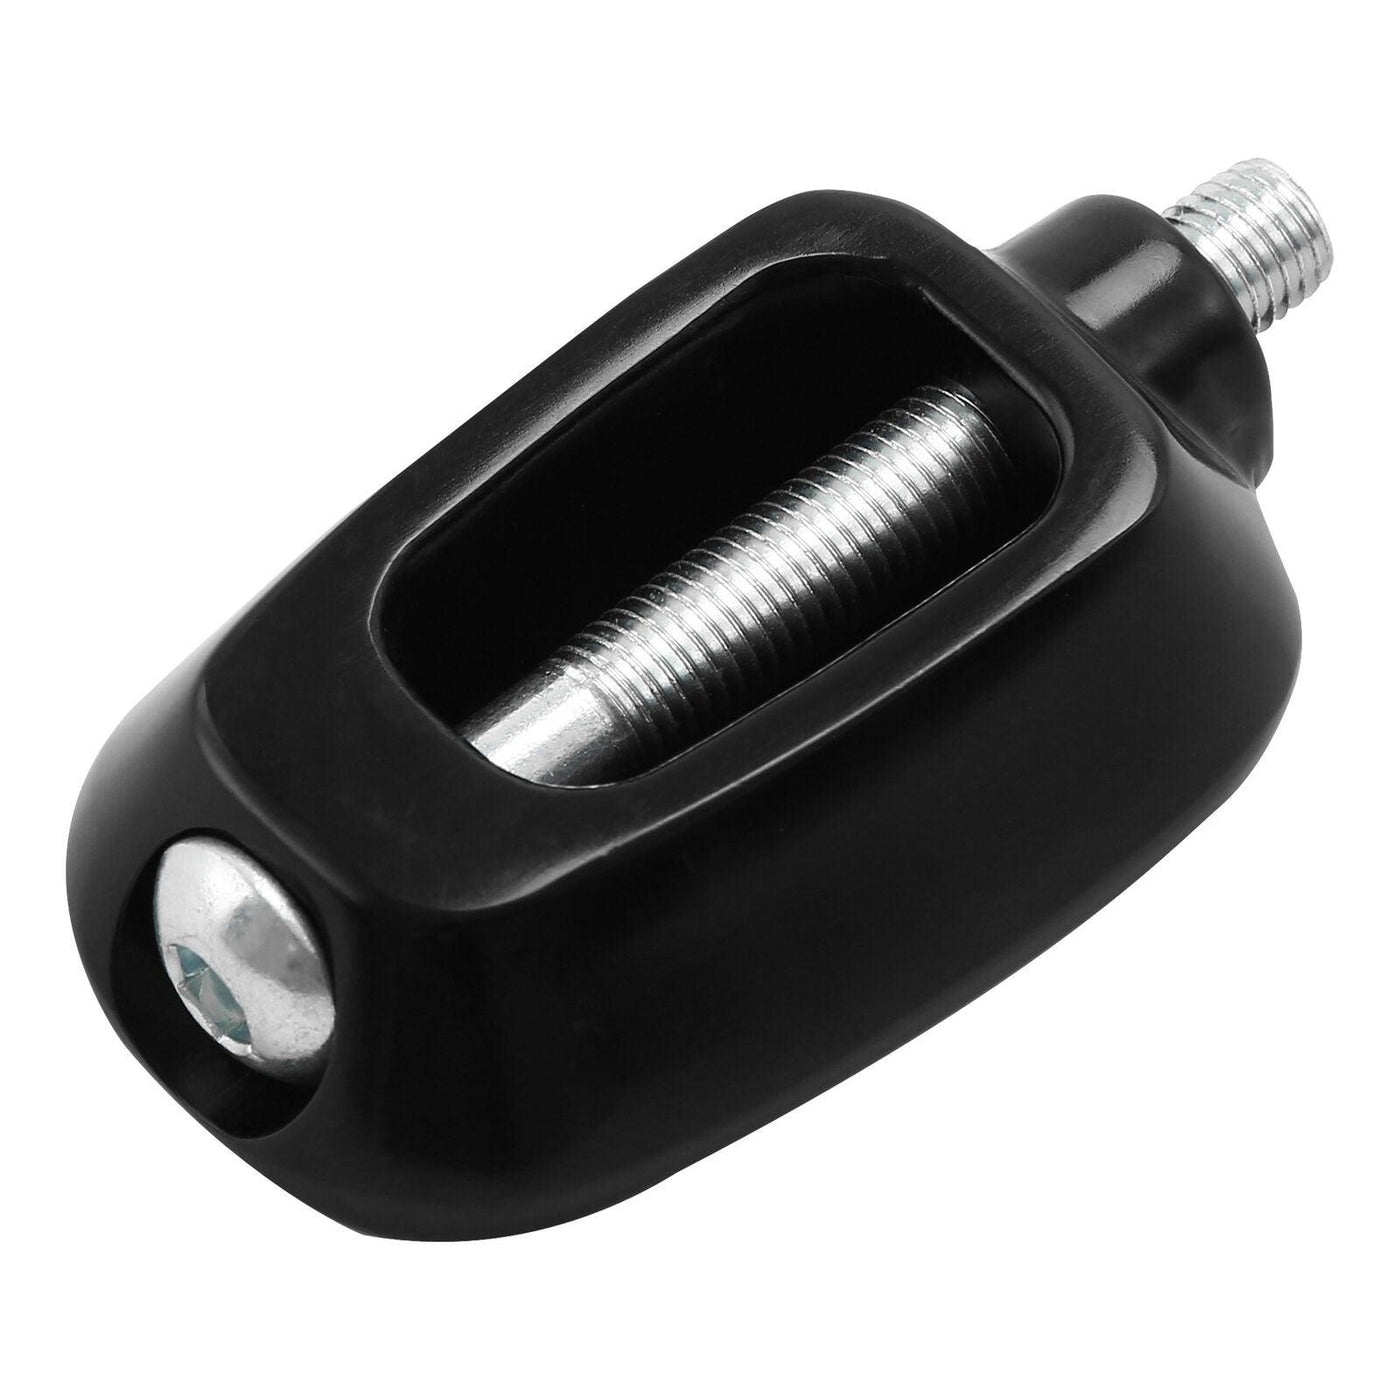 Black Shift Shifter Peg Fit For Harley Touring Road Glide Softail Sportster XL - Moto Life Products